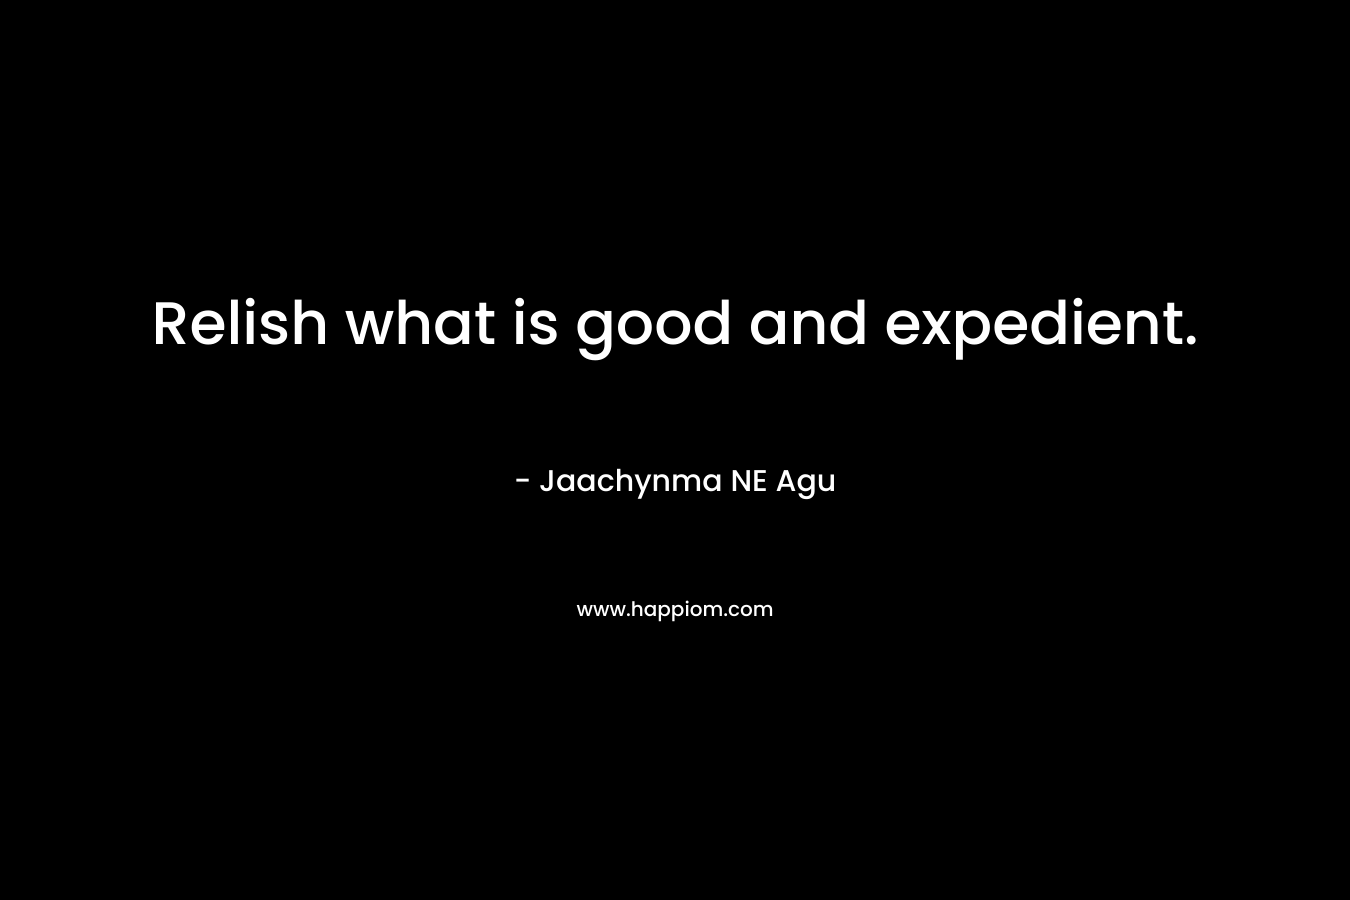 Relish what is good and expedient.